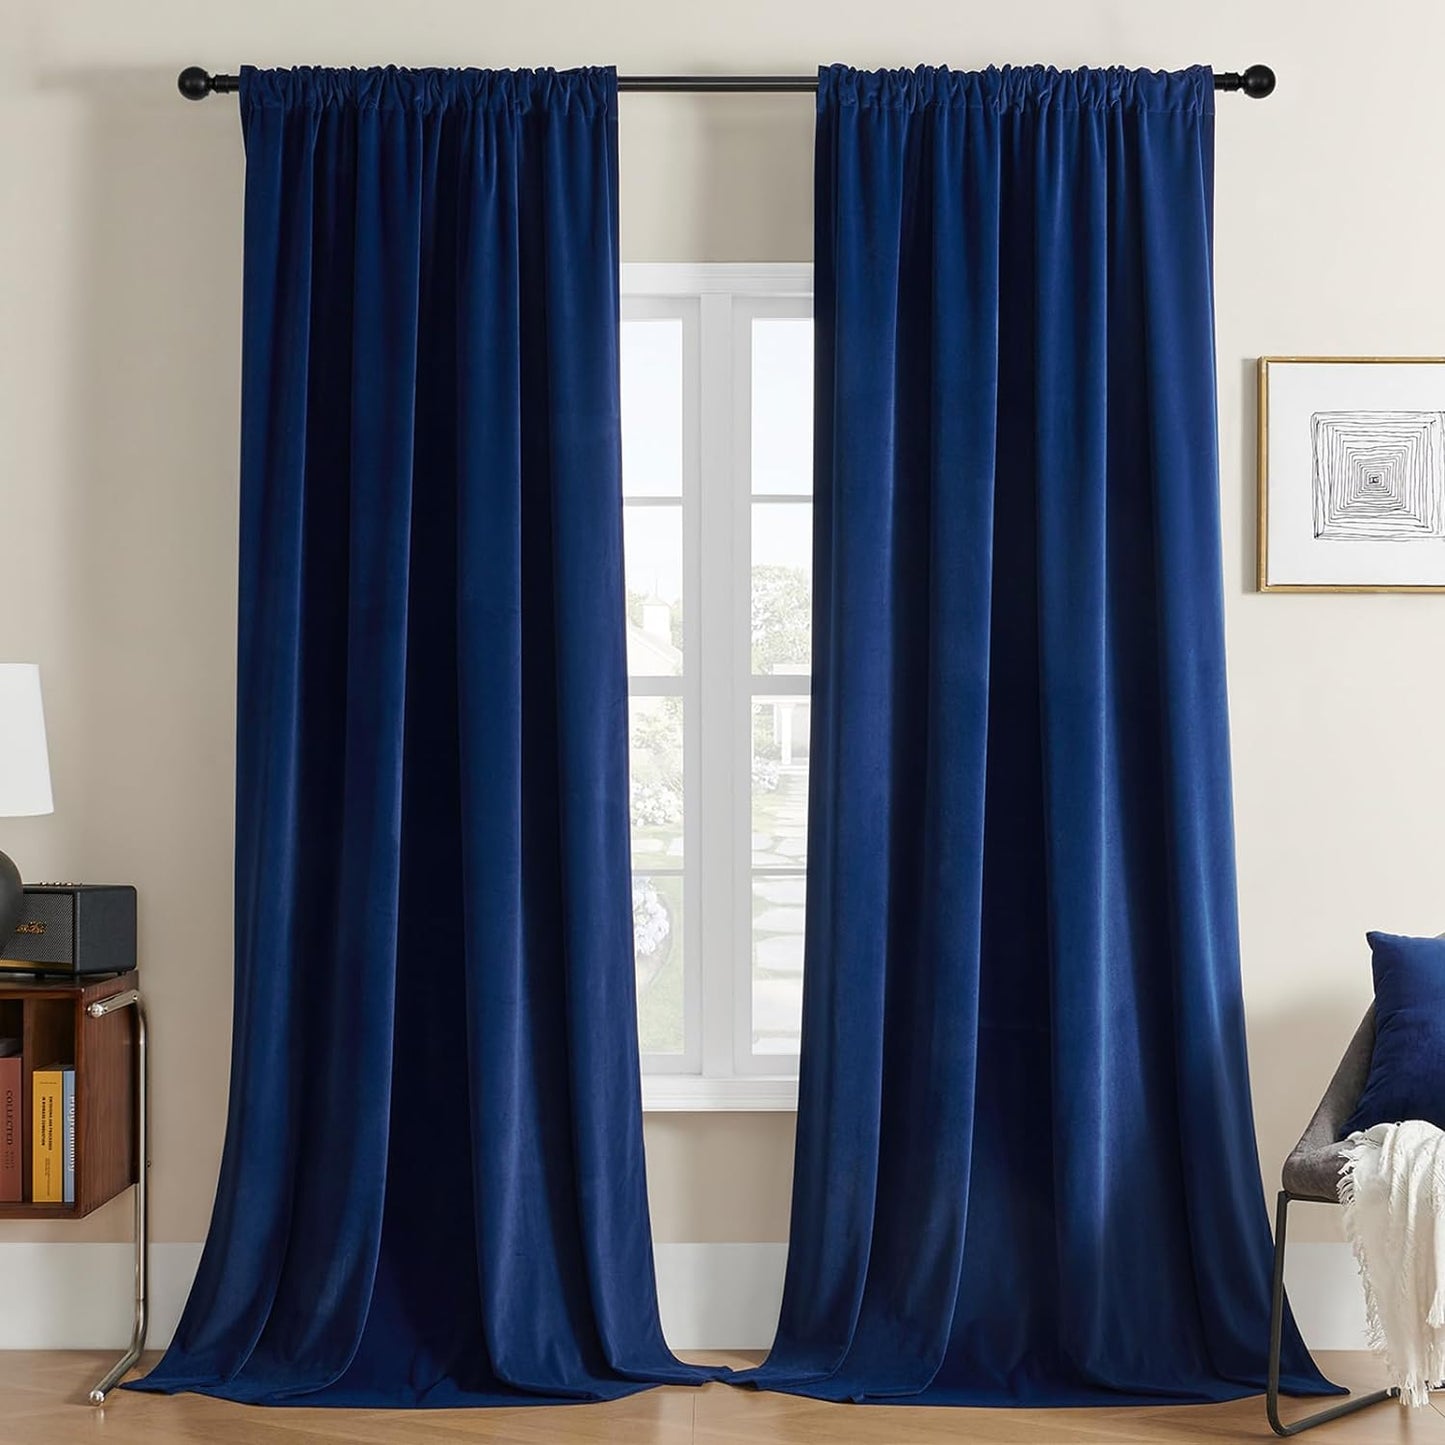 Joydeco Black Velvet Curtains 90 Inch Length 2 Panels, Luxury Blackout Rod Pocket Thermal Insulated Window Curtains, Super Soft Room Darkening Drapes for Living Dining Room Bedroom,W52 X L90 Inches  Joydeco Rod Pocket | Royal Blue 52W X 72L Inch X 2 Panels 